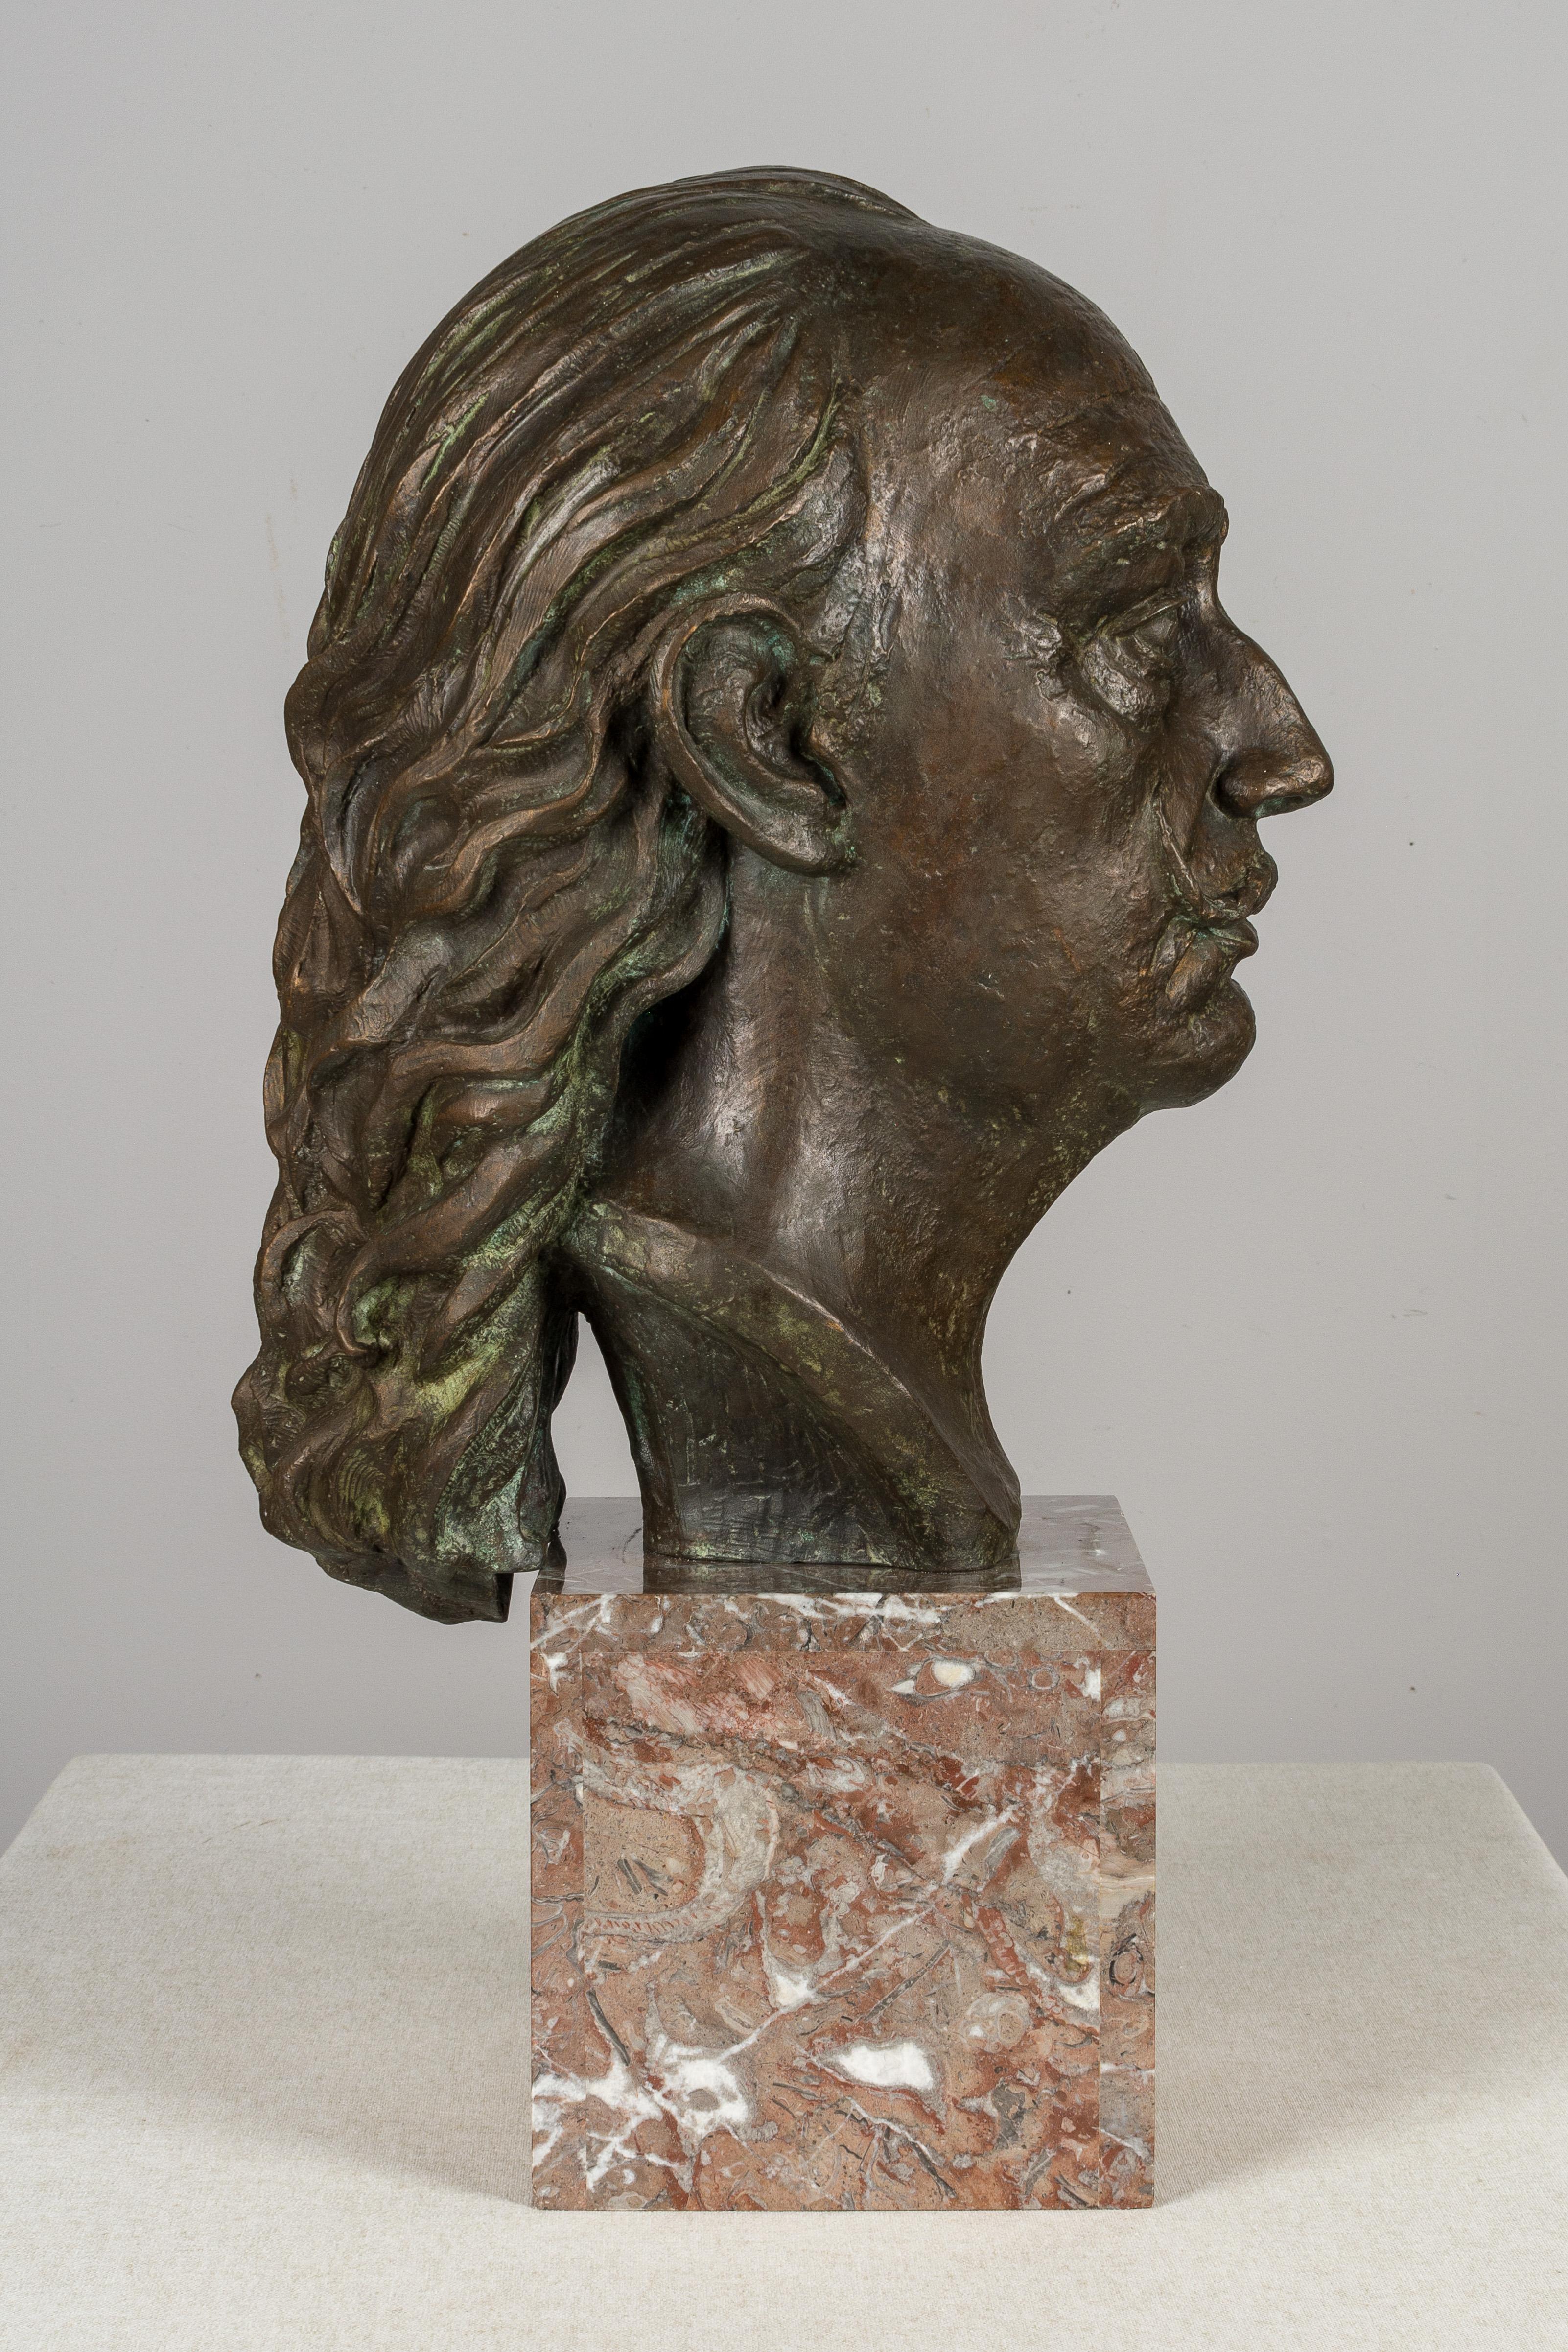 A large cast bronze bust of Surrealist artist Salvador Dali by Spanish sculptor Raimon Casals i Alsina (Barcelona 1922-), circa 1986. One of 9 copies. At present, a copy can be seen at the Abelló Museum in Mollet. On a Languedoc marble base. Total